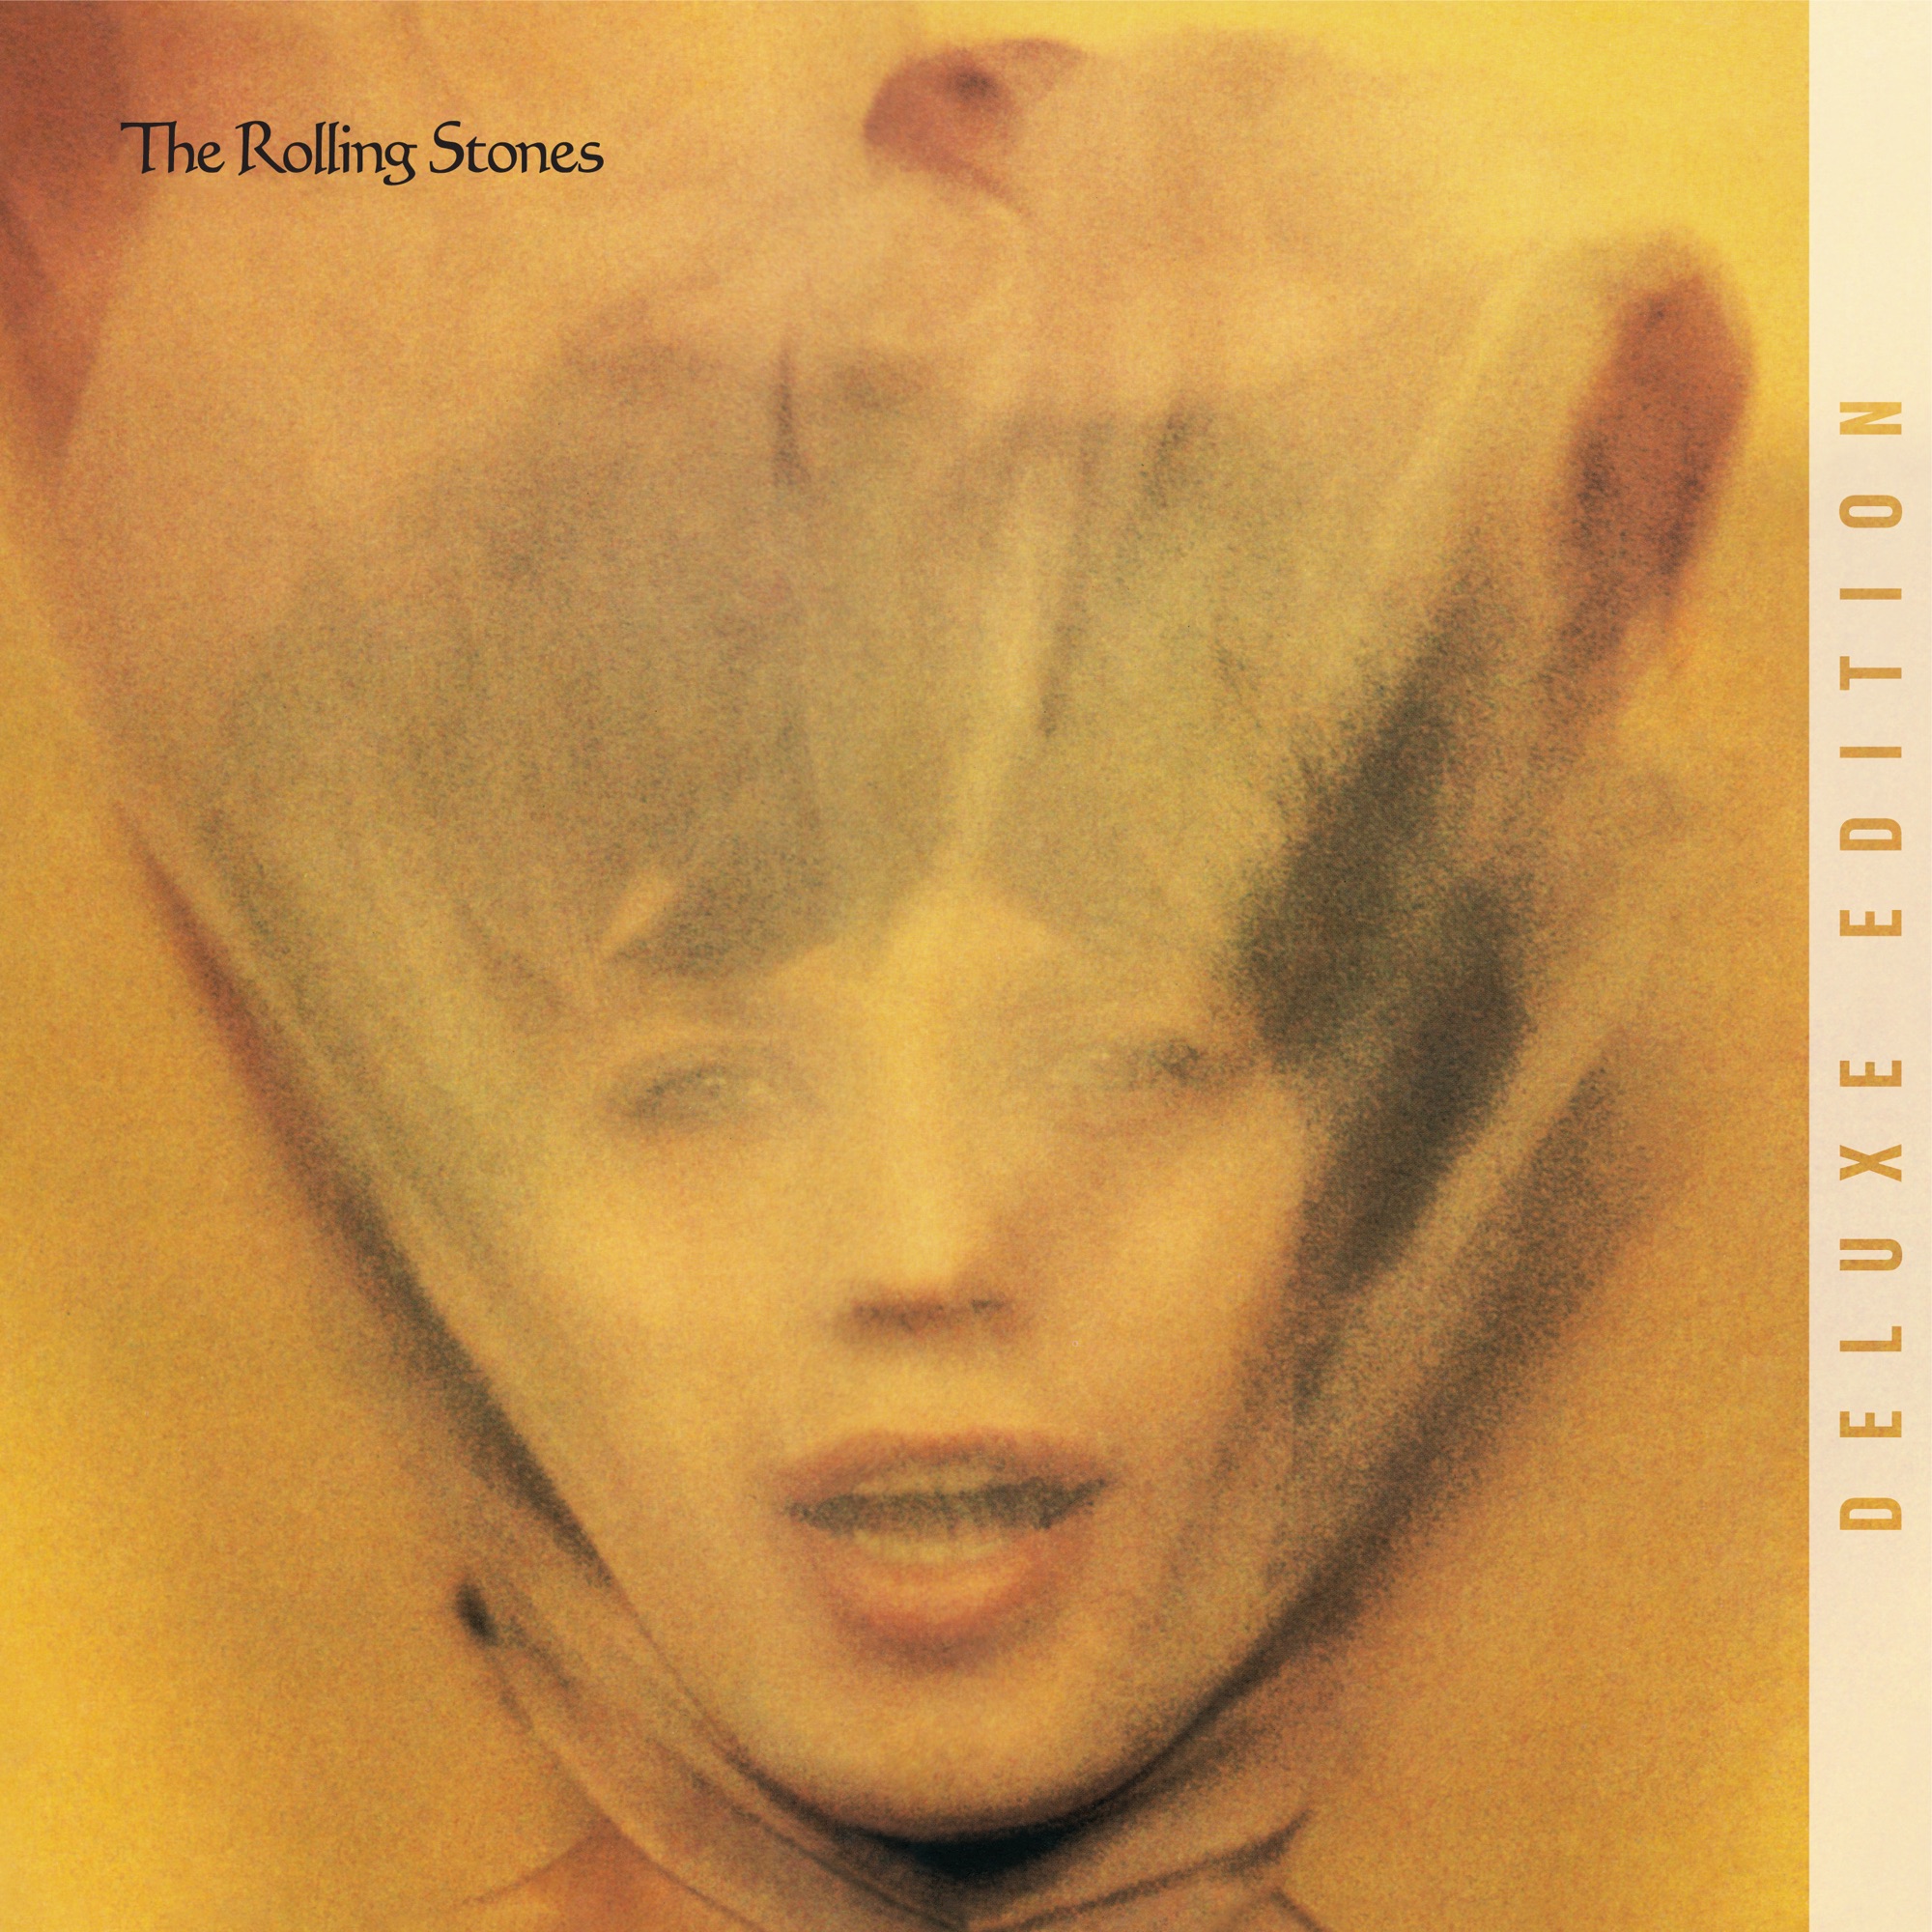 The Rolling Stones - Goats Head Soup (2020 Deluxe)